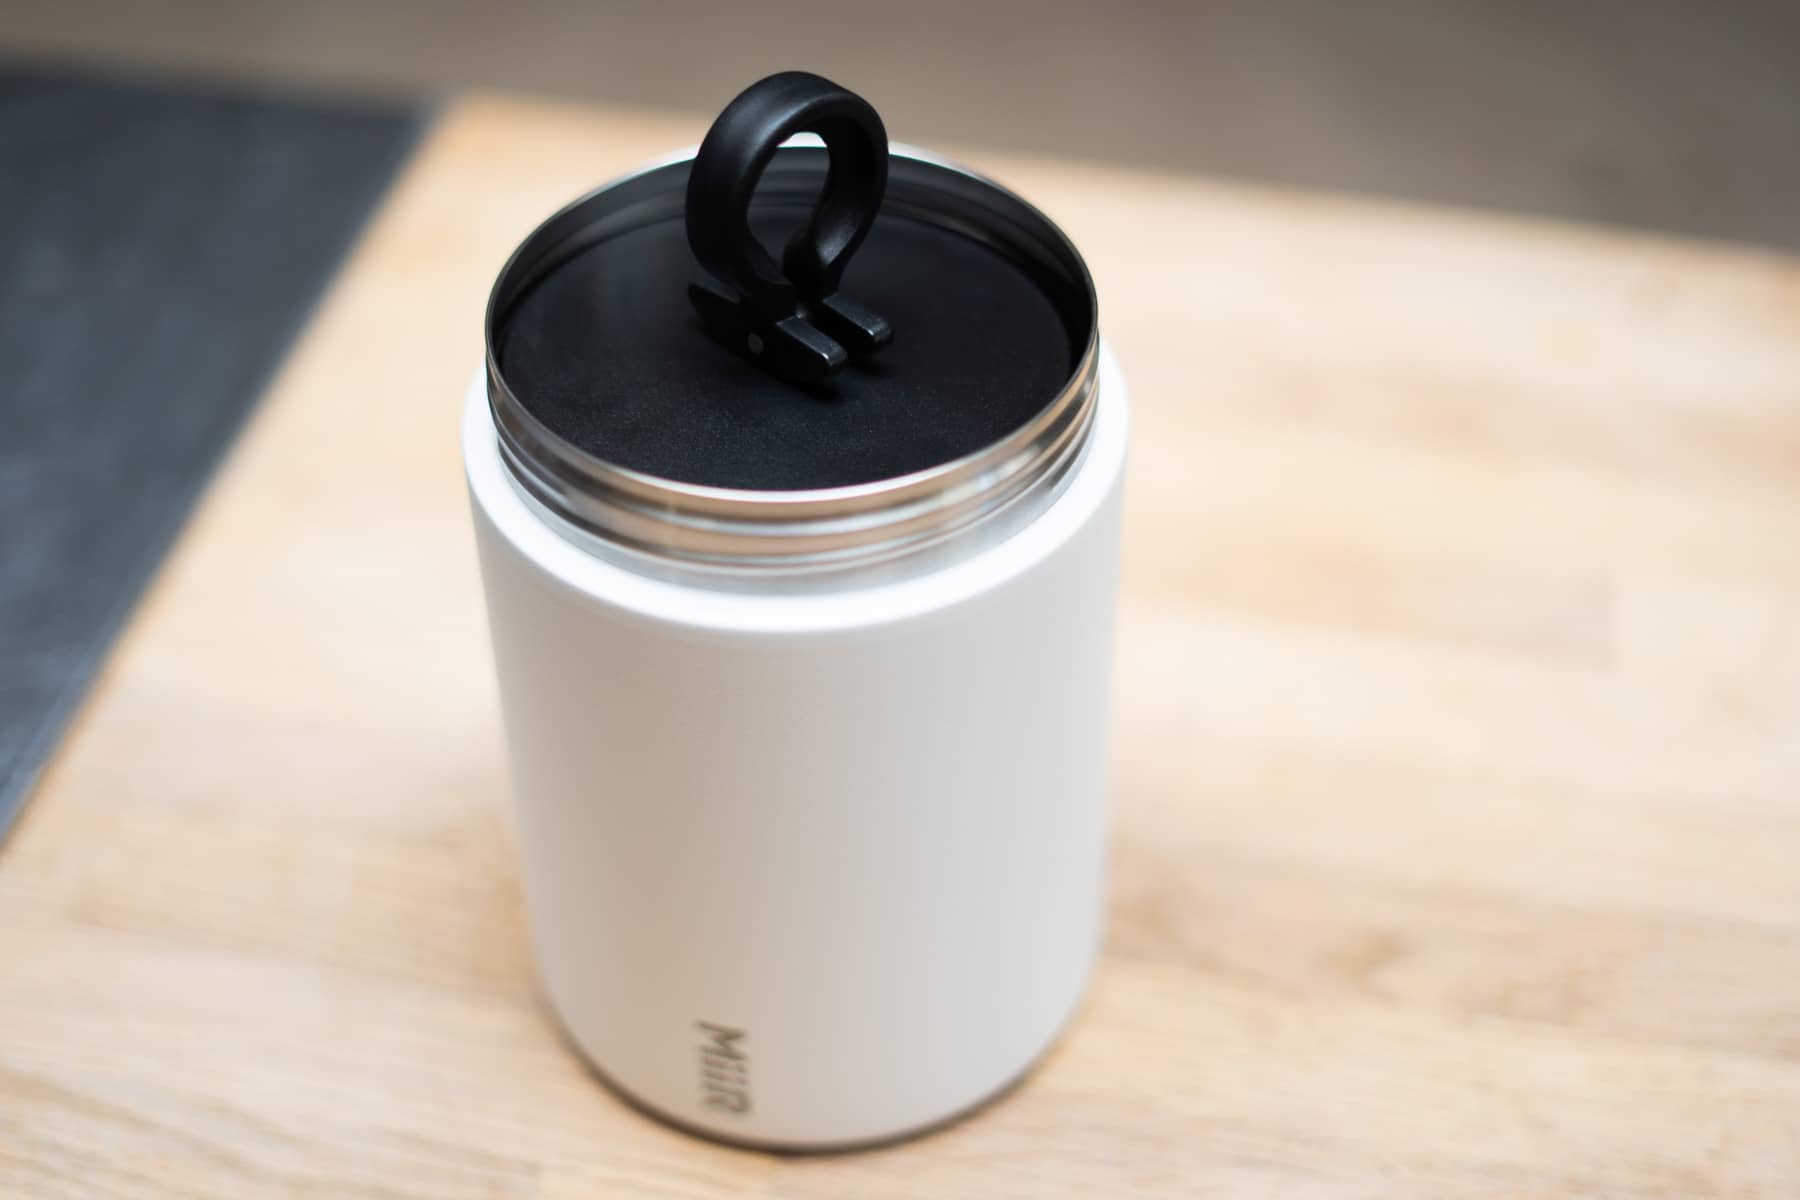 Top view of a white Miir coffee canister sitting on a cutting board